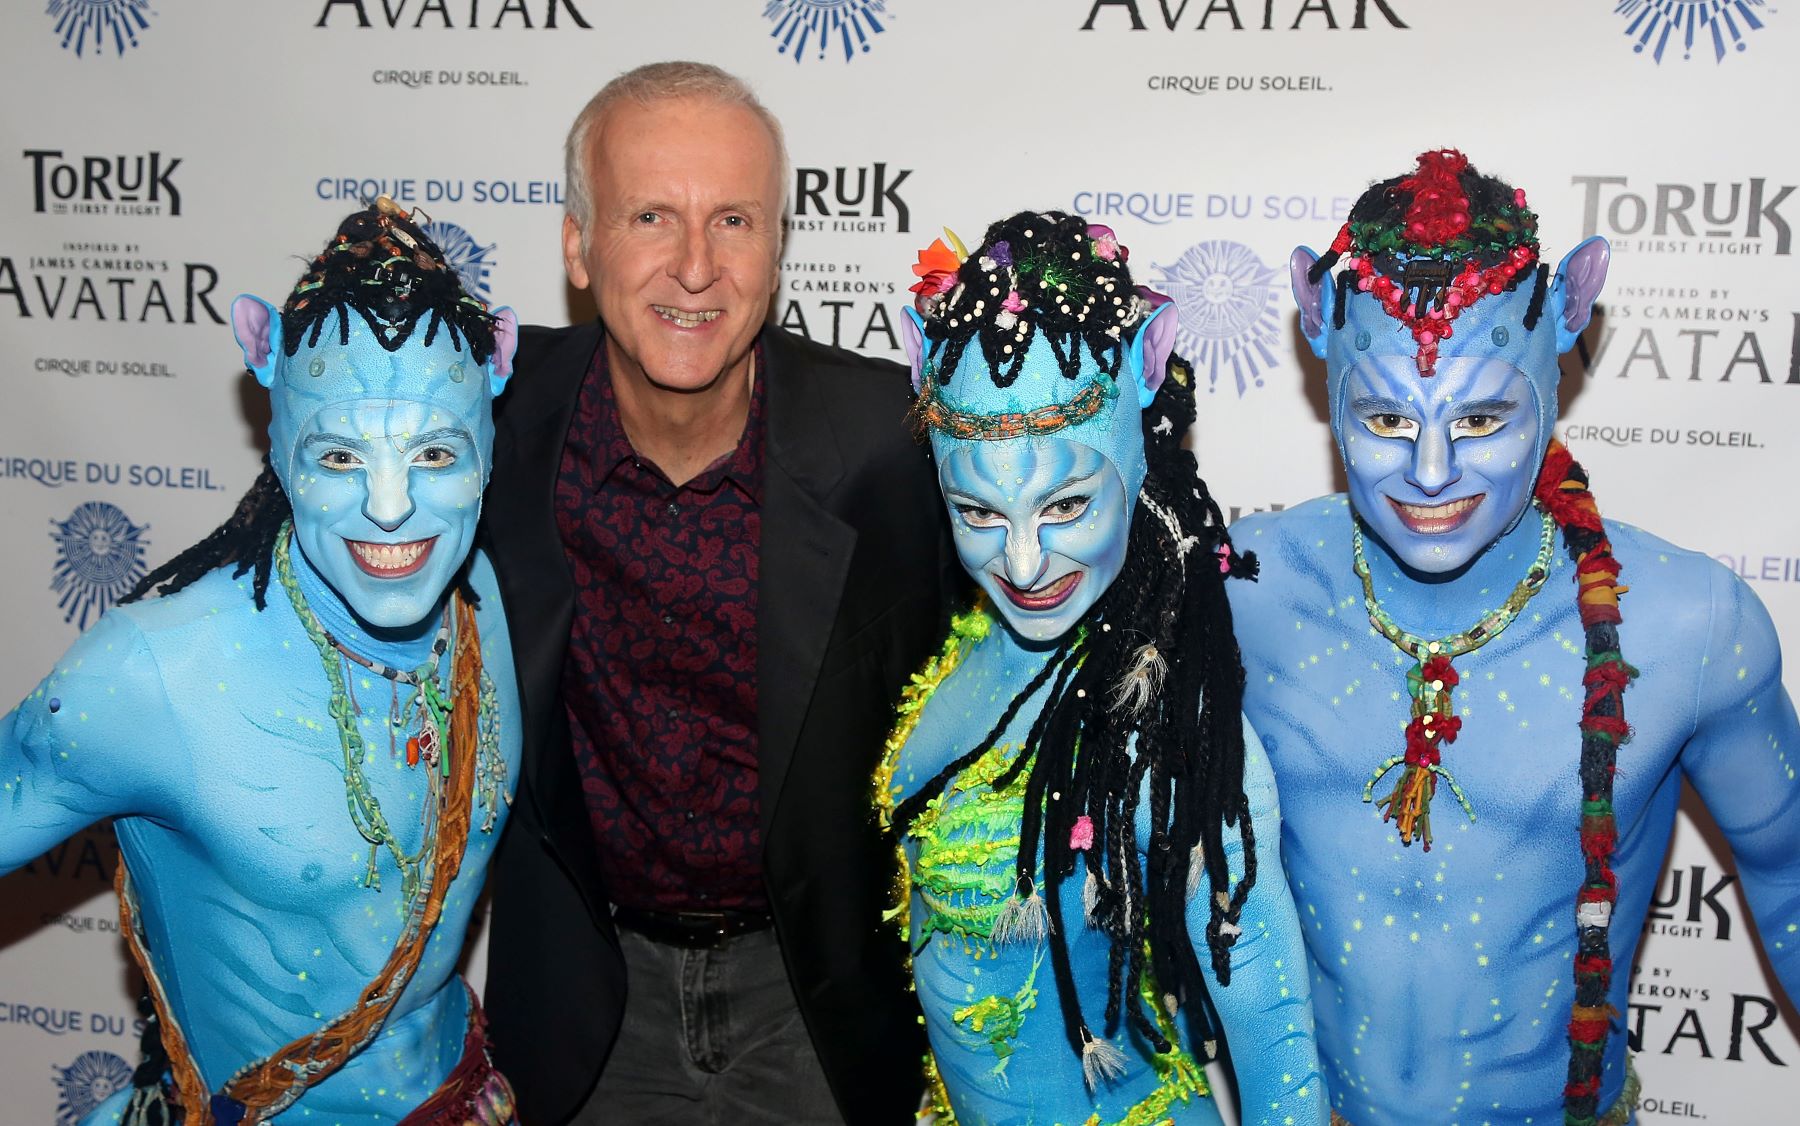 ‘Avatar’: James Cameron Was Told to Cut out the ‘Tree-Hugging, Hippie Bulls***’ From the Original